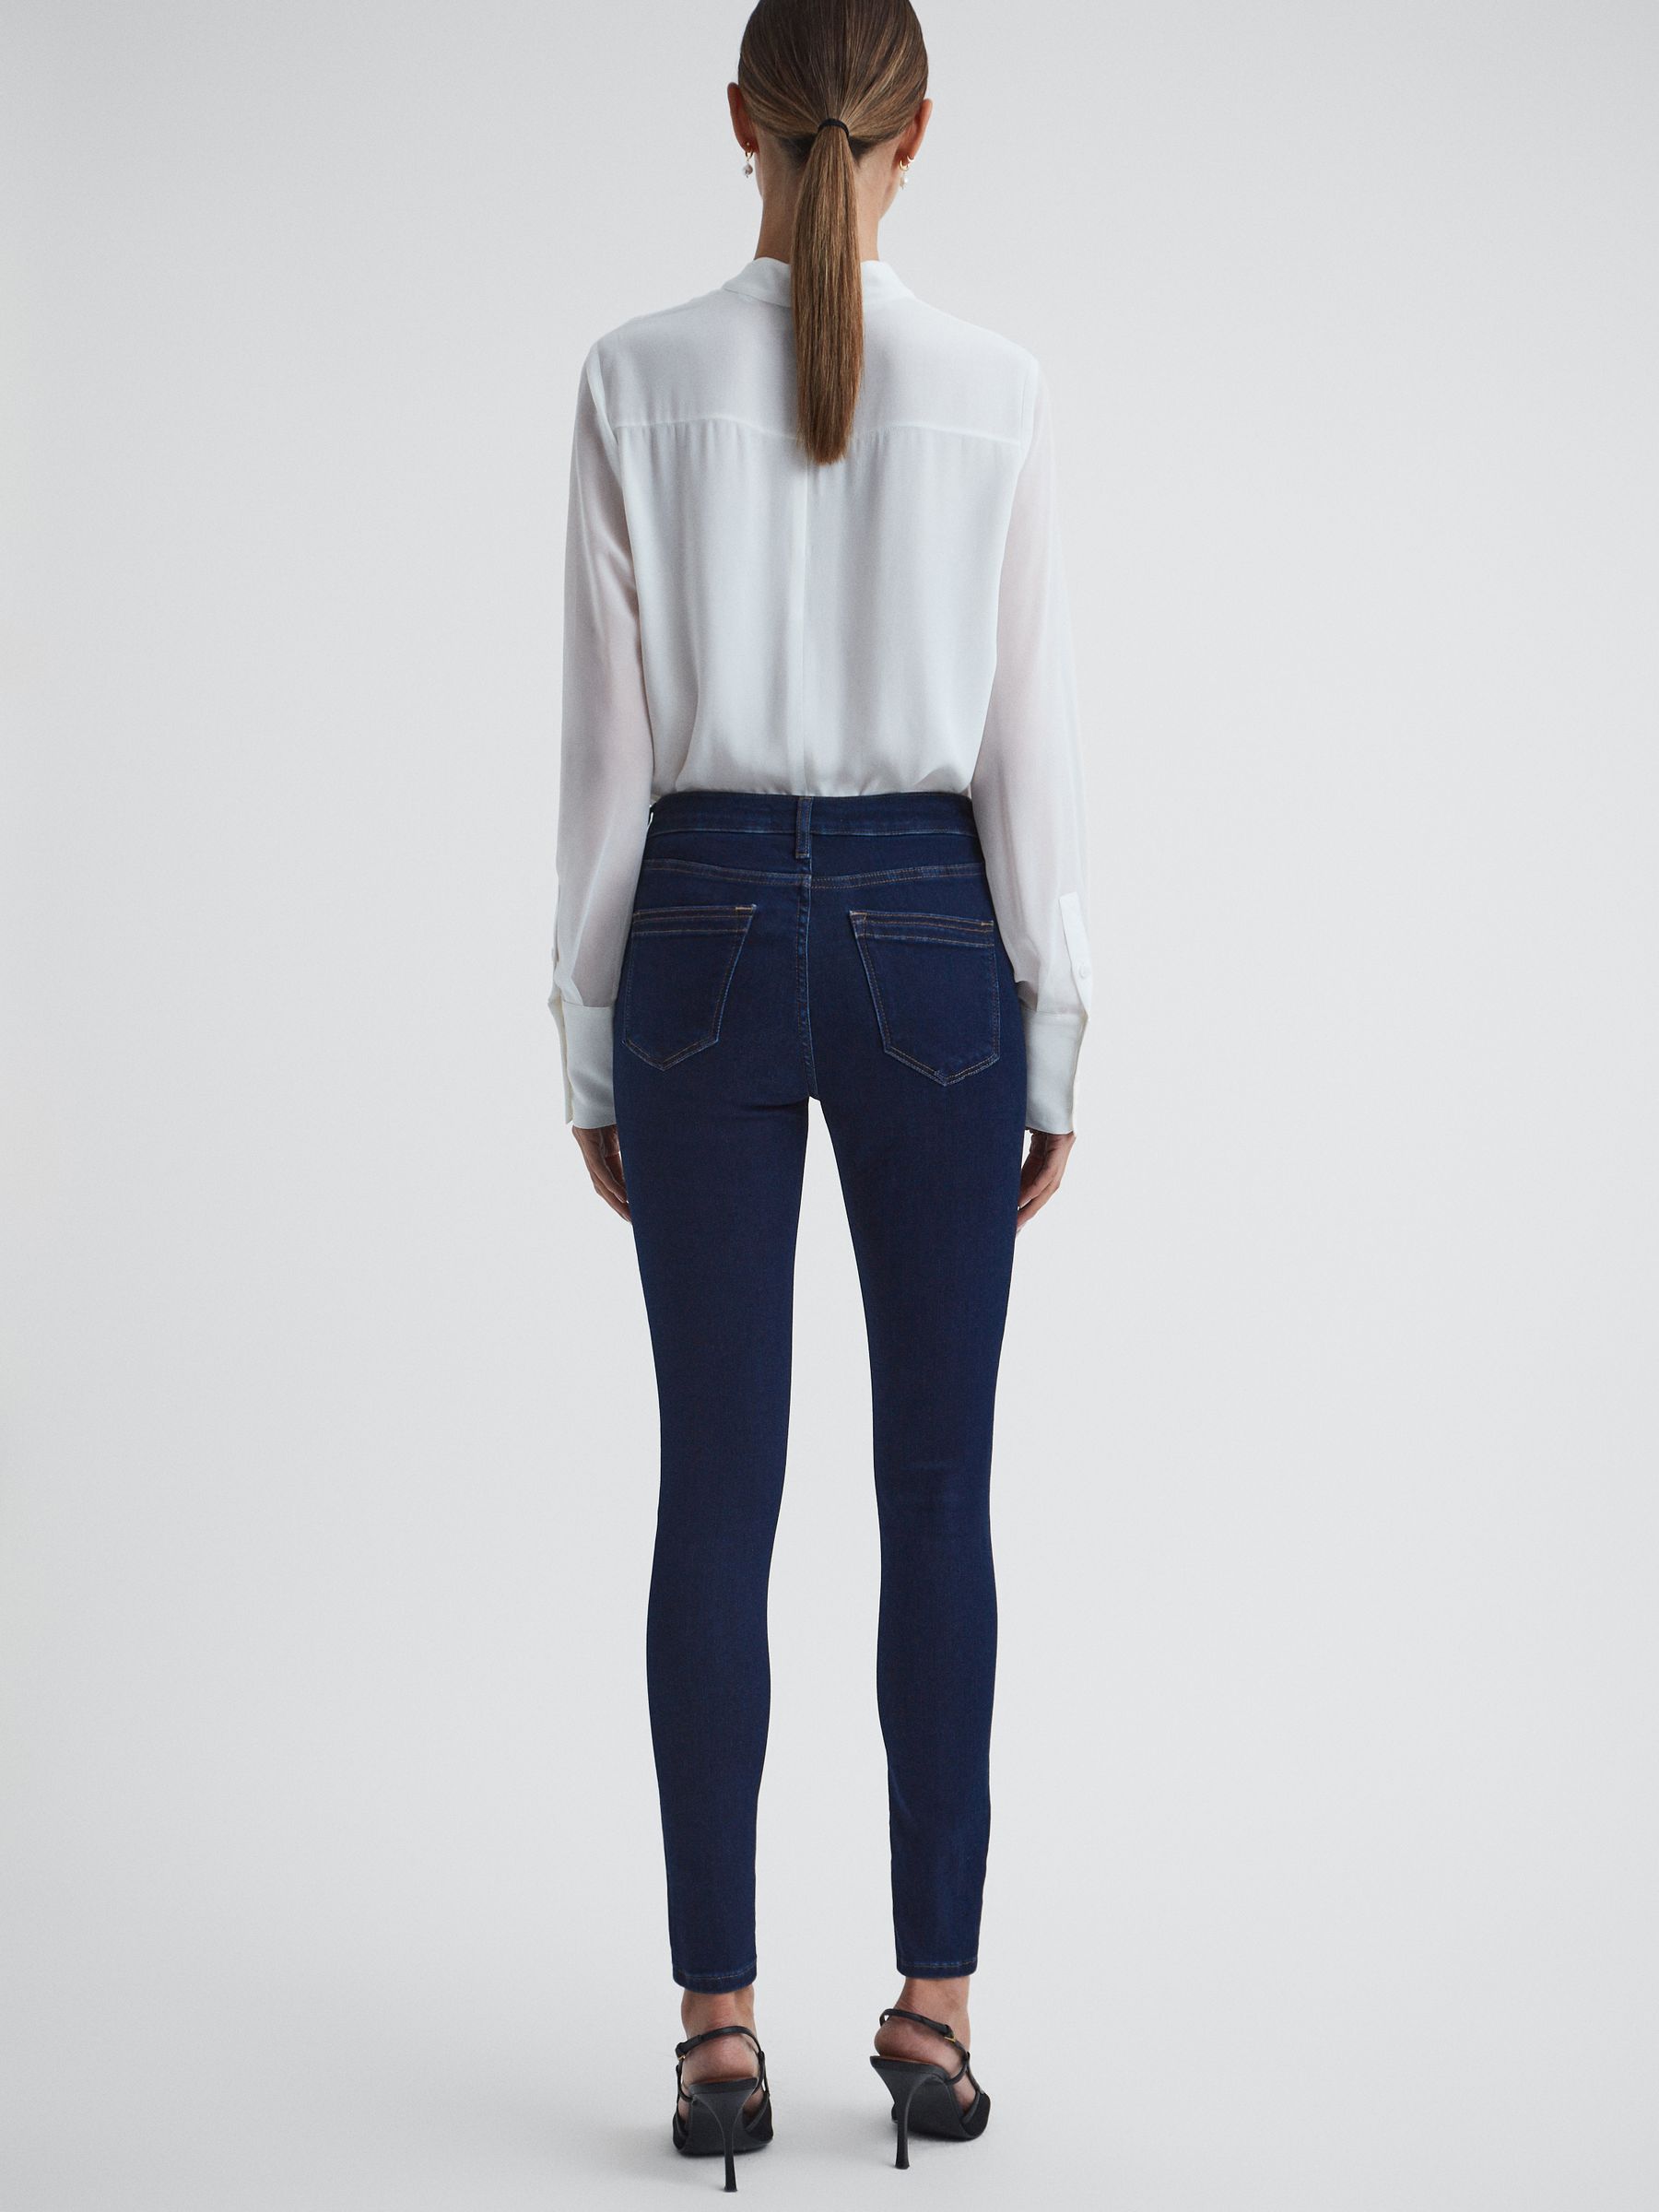 Reiss Lux Mid Rise Skinny Jeans - REISS